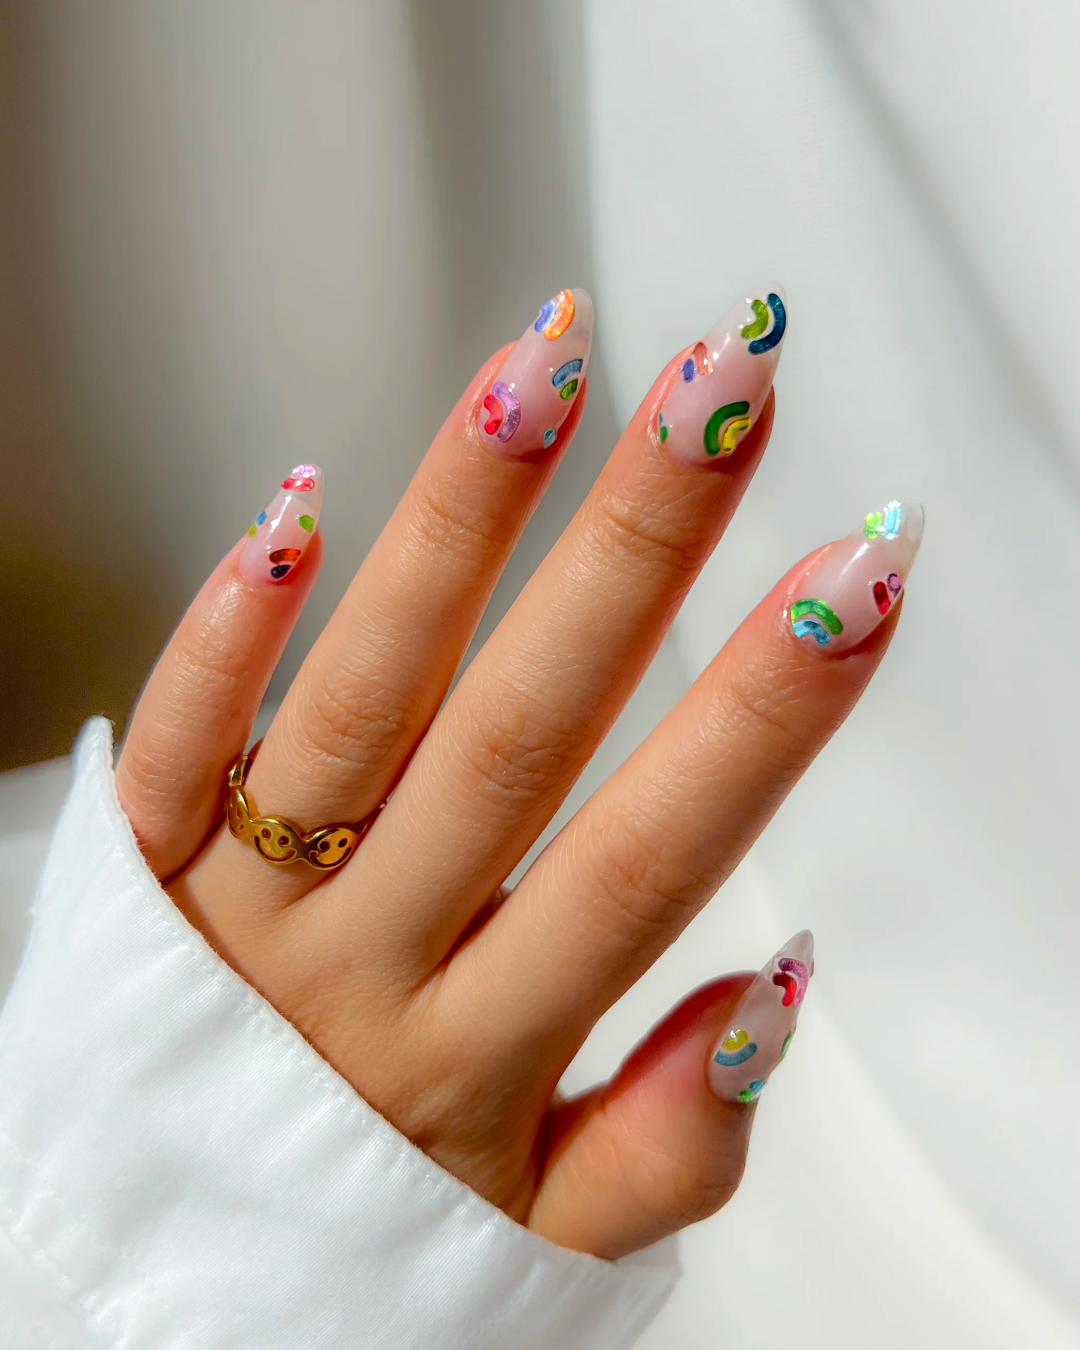 The Best Acrylic Nail Designs for Summer - BeautyFrizz